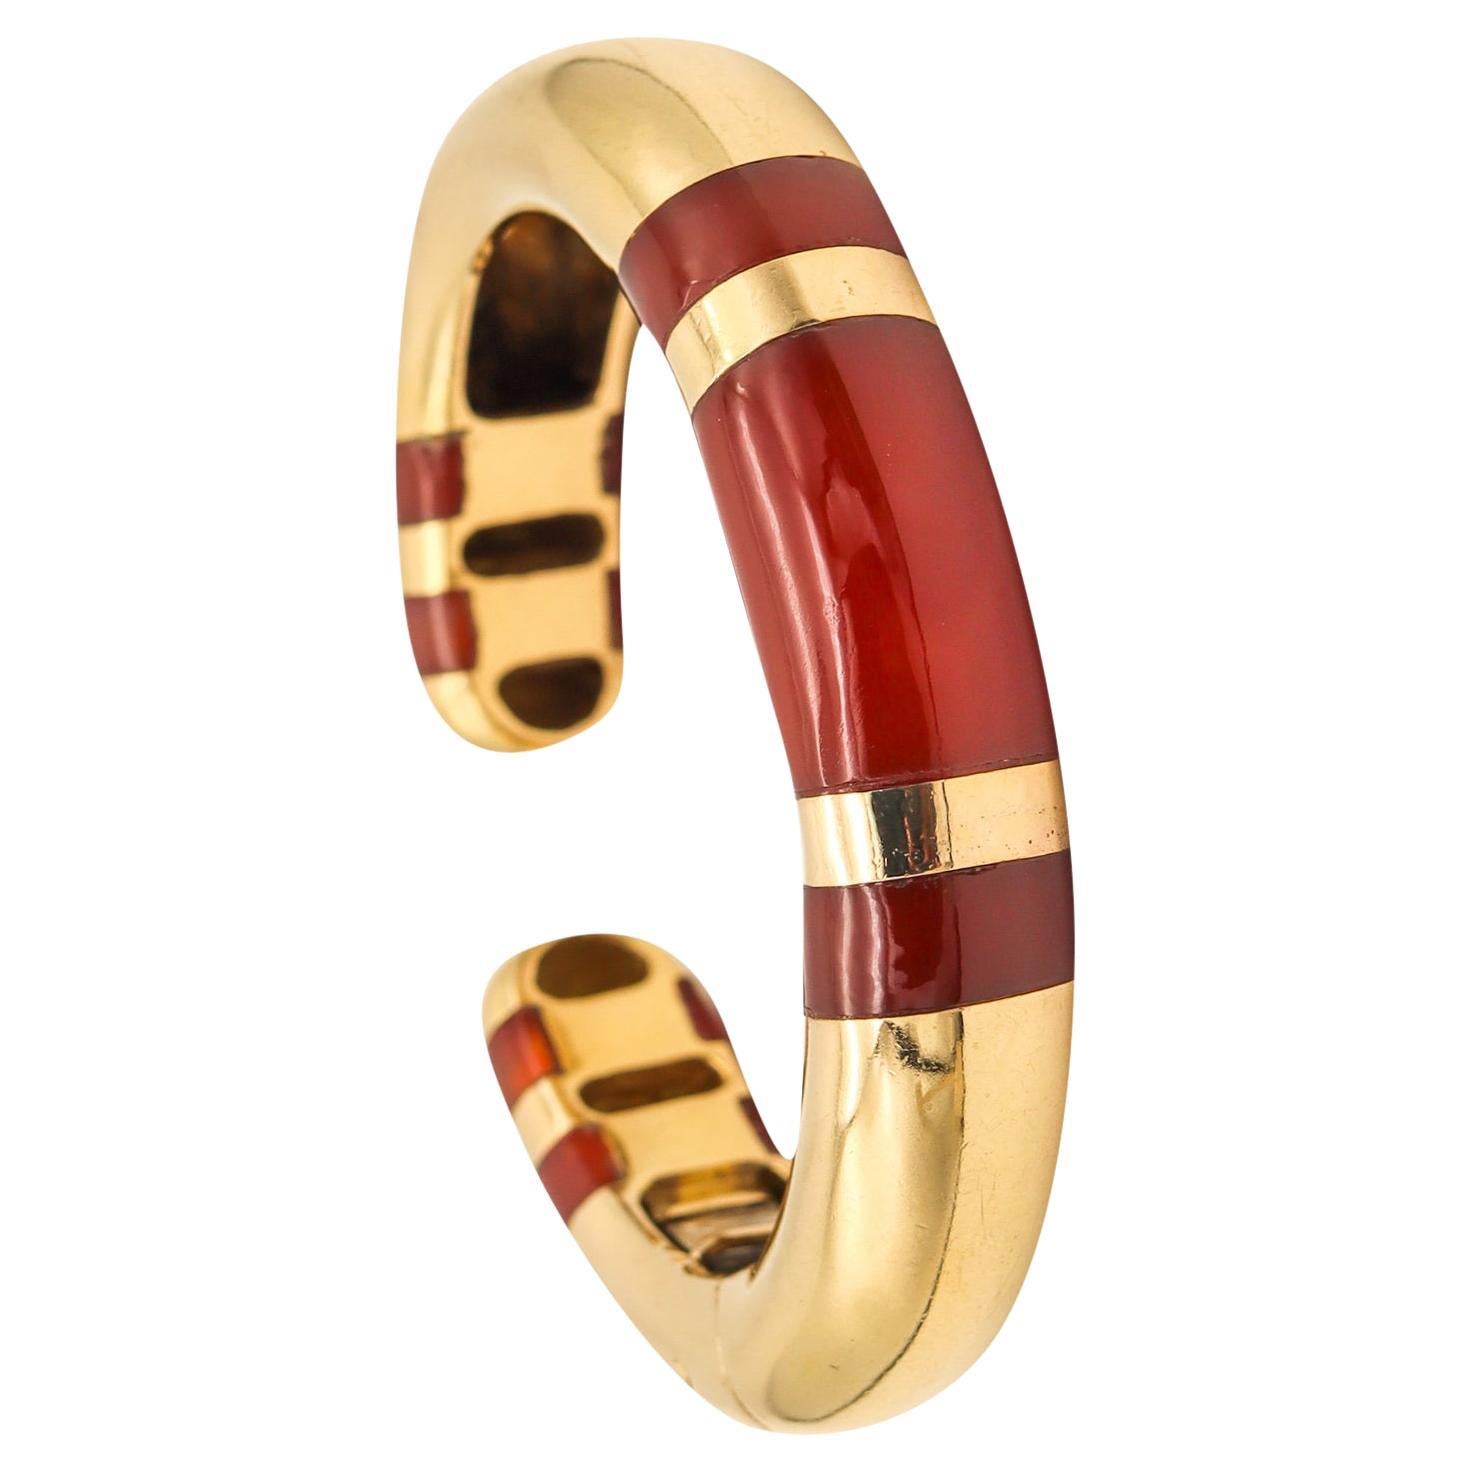 Tiffany & Co 1973 Sonia Younis Bracelet Cuff in 18kt Yellow Gold with Carnelian